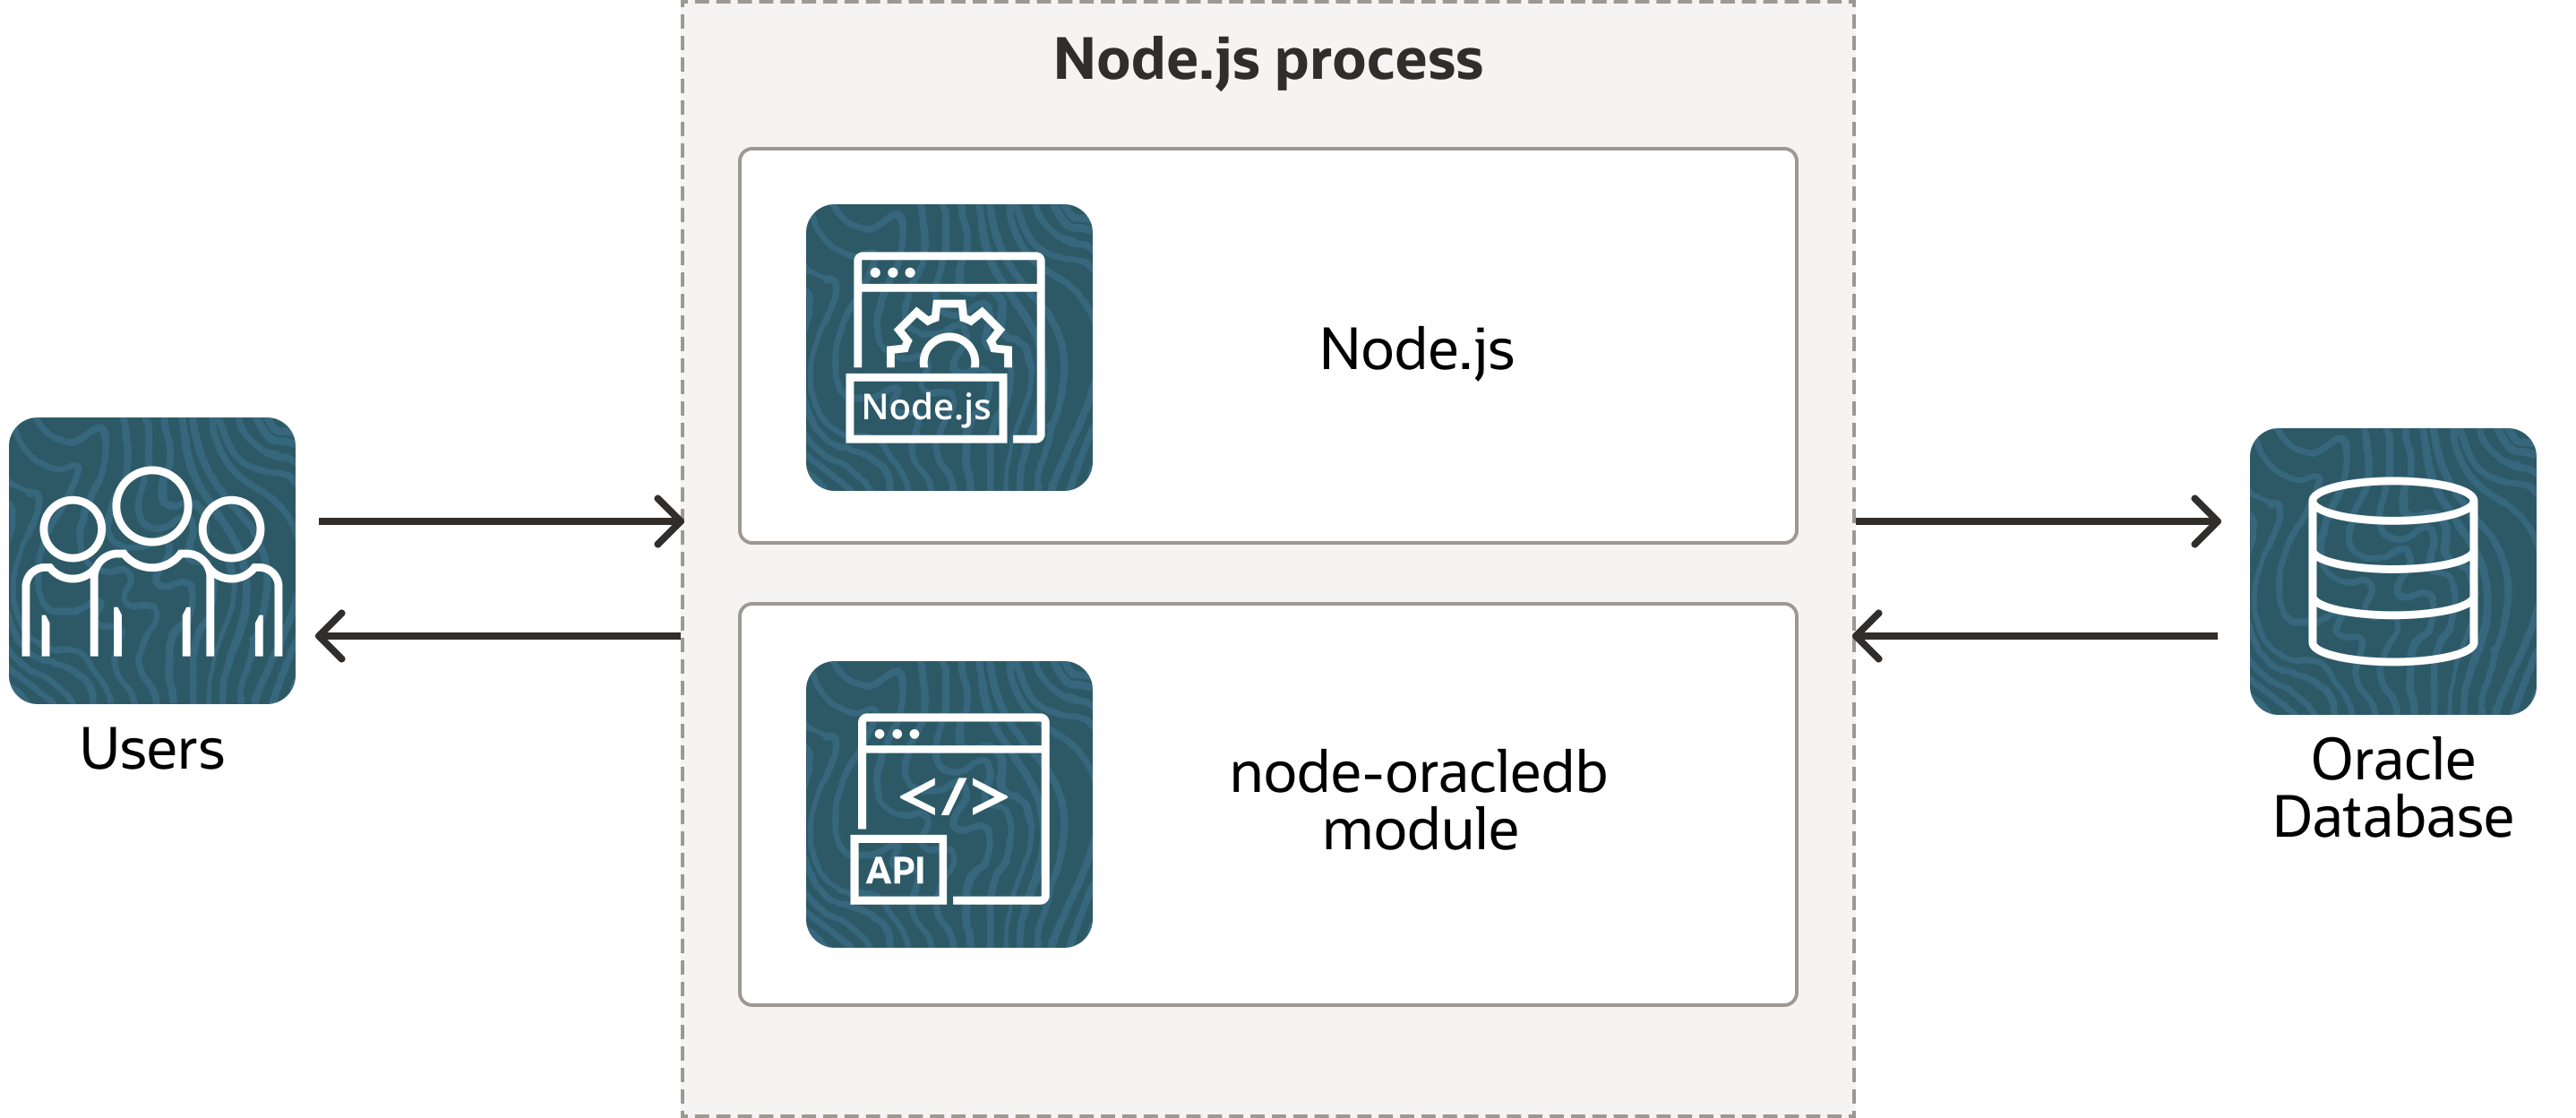 Illustrates the architecture of the node-oracledb driver in Thin mode. At the left is the Users icon. It is connected to a block labeled Node.js process, which contains two smaller blocks labeled Node.js and node-oracledb module. The Node.js block connects to the Oracle Database icon. The connection establishment sequence is described in the following text.